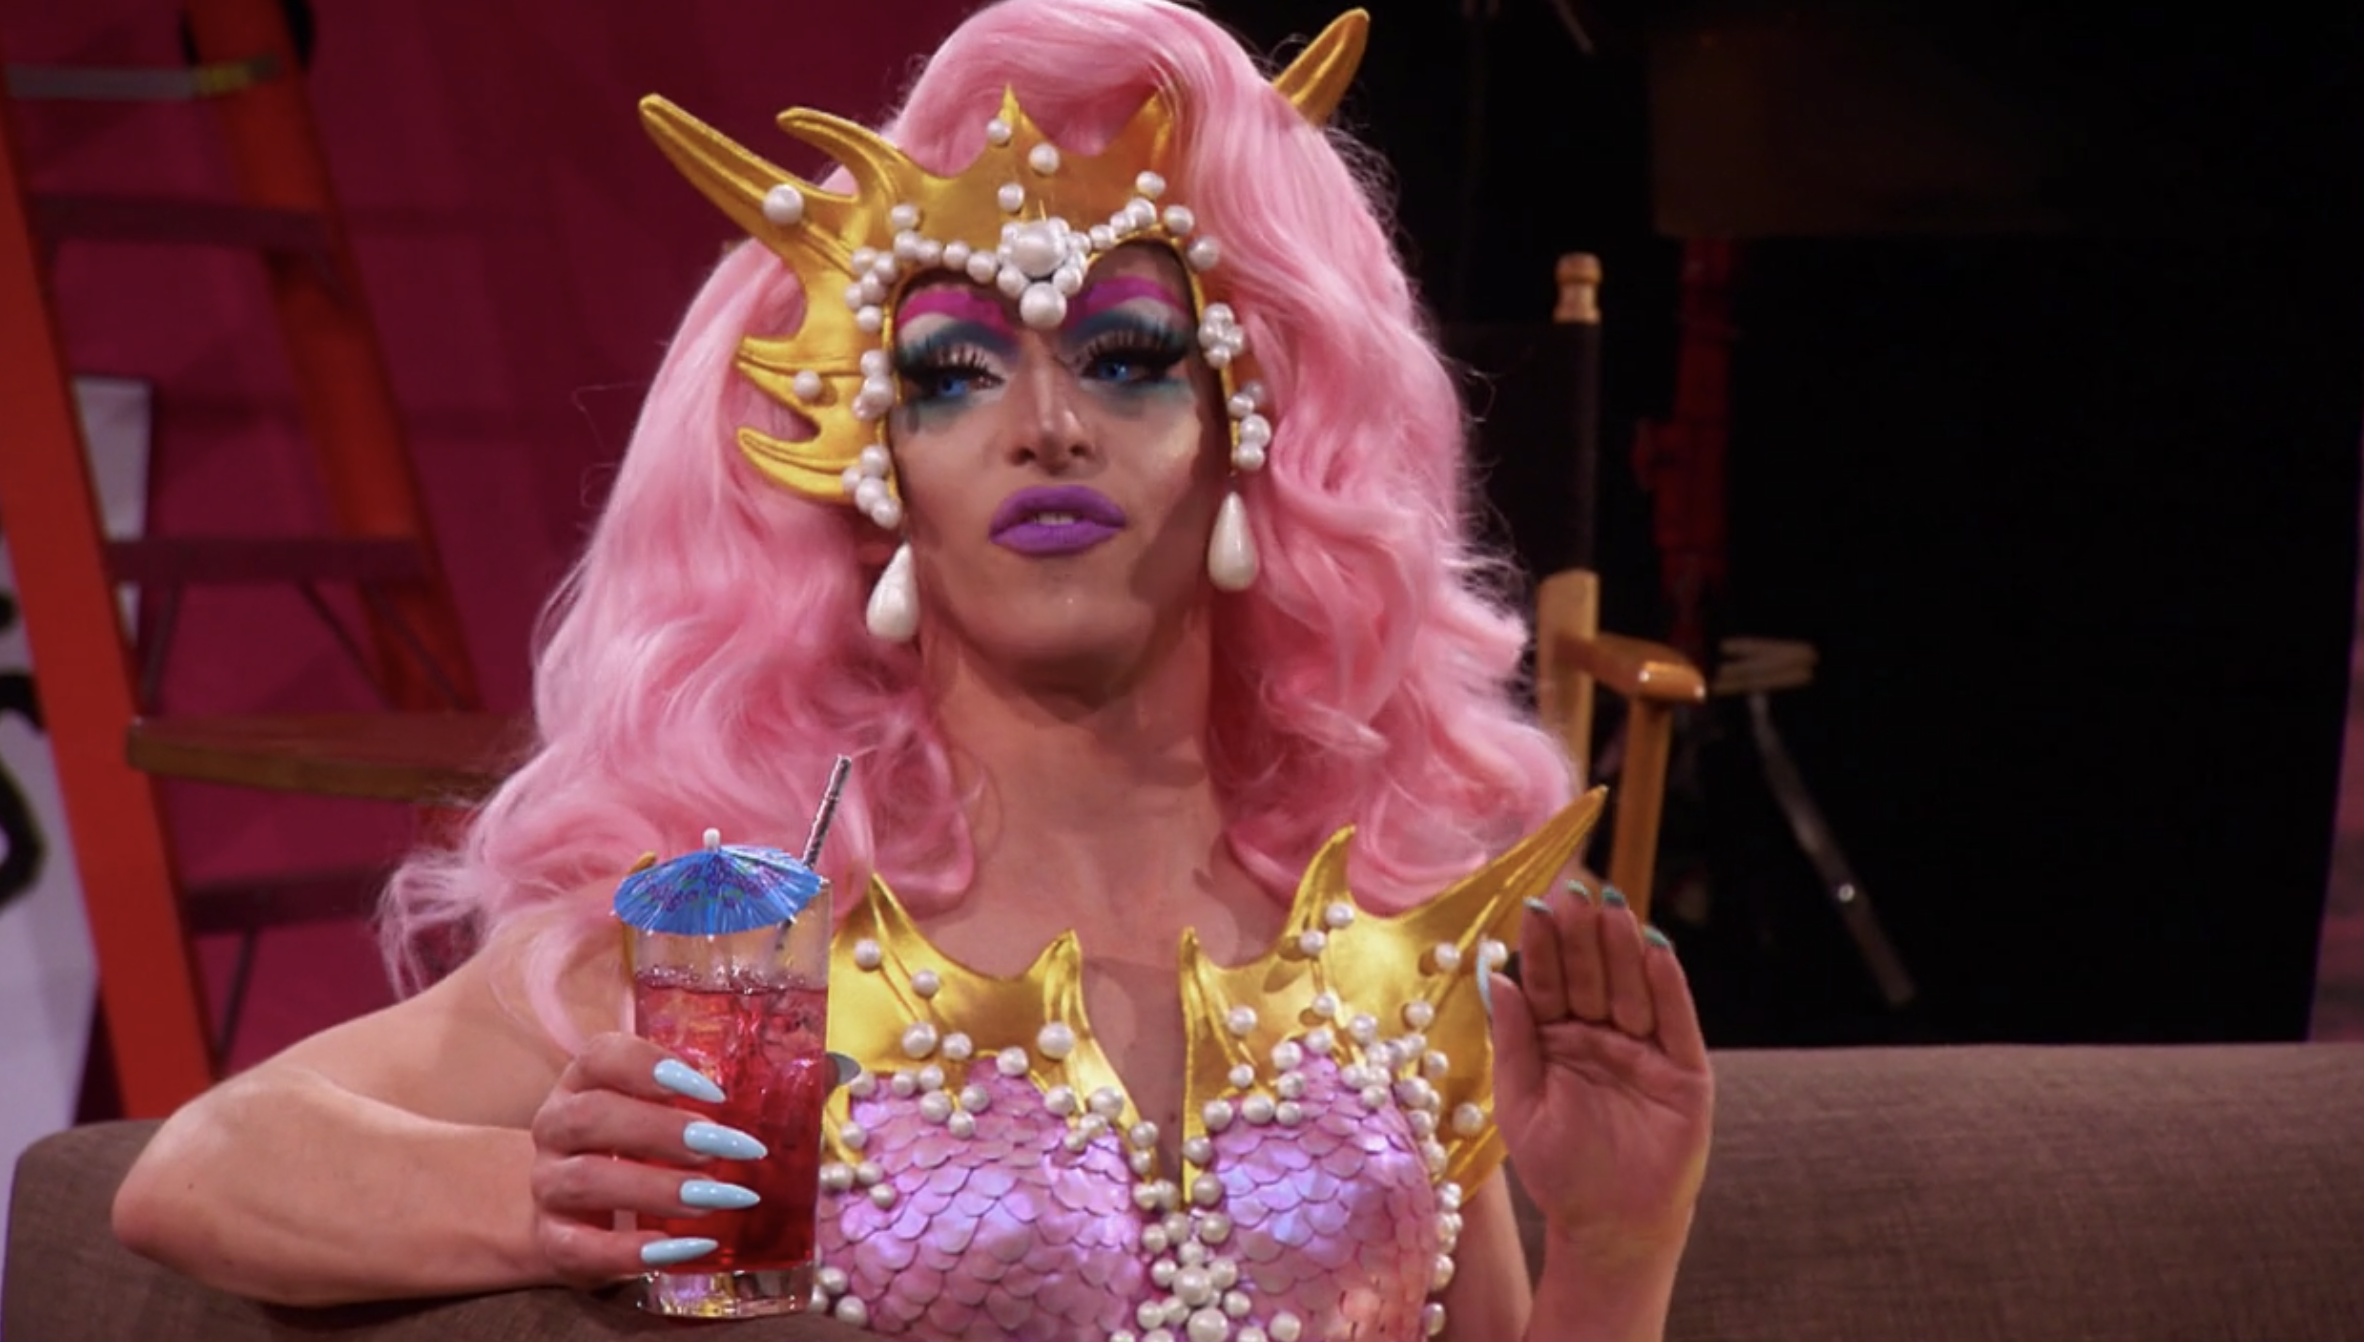 How Much Money Do Contestants Spend to Go on 'RuPaul's Drag Race'?